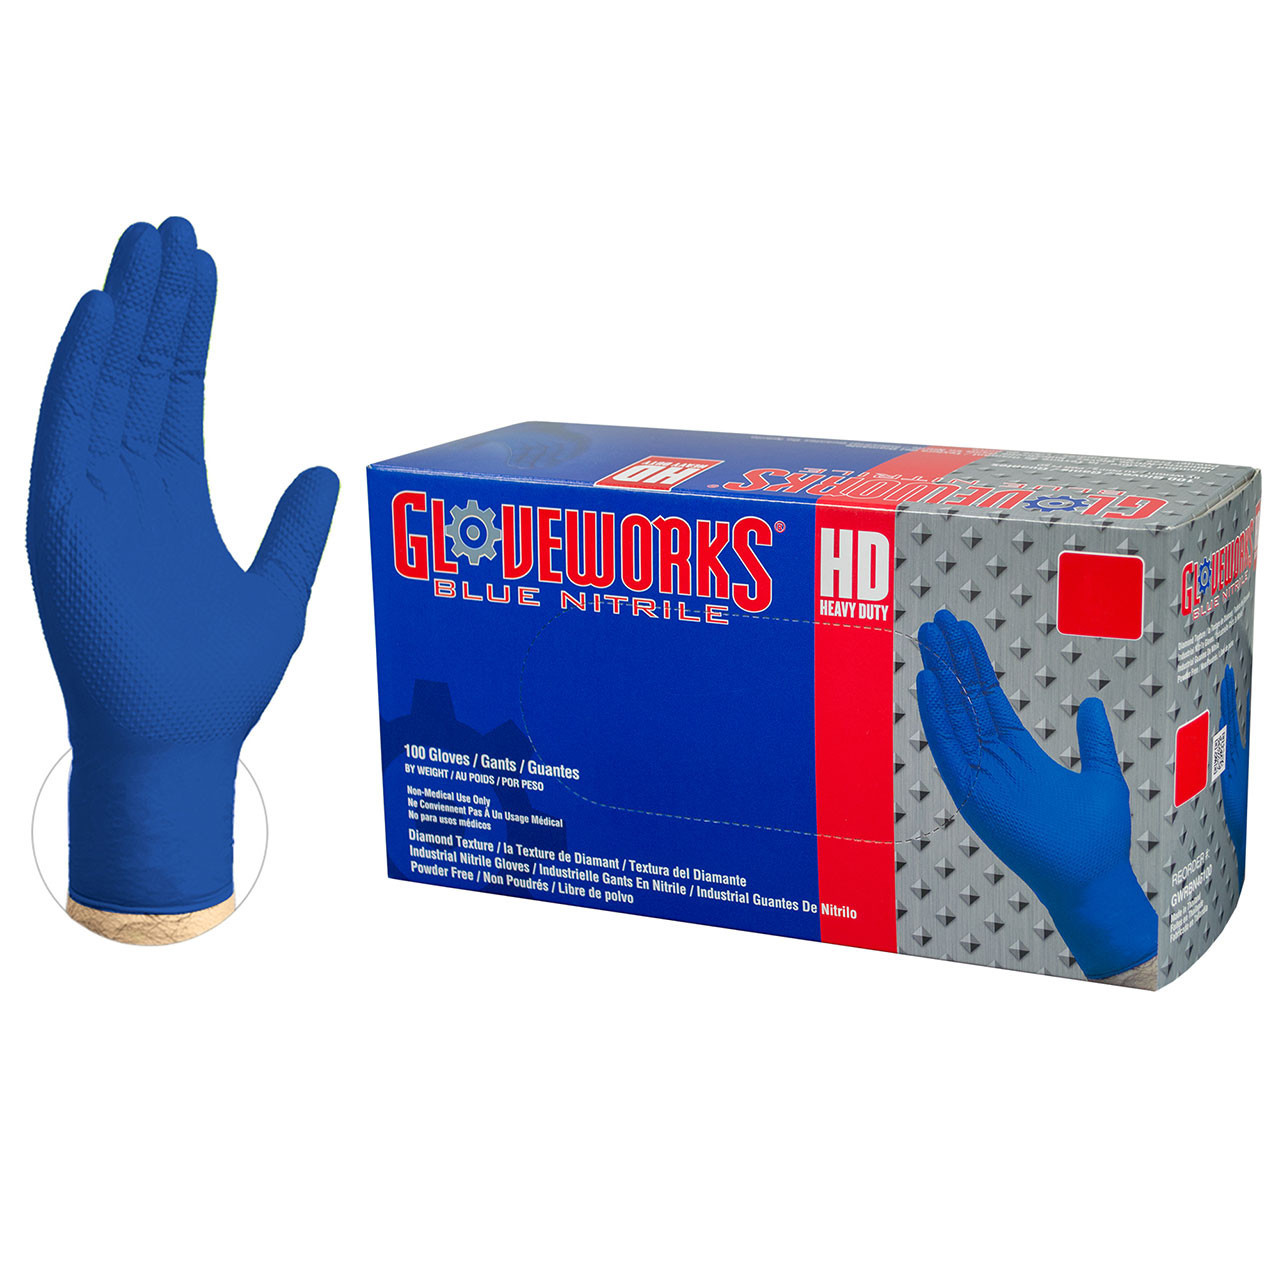 Blue Oil Gloves for Men,Heavy Duty Oil Resistant Gloves for Fuel Workers,Nitrile Coated Gloves 6 & 12 Pairs Large Bulk Pack